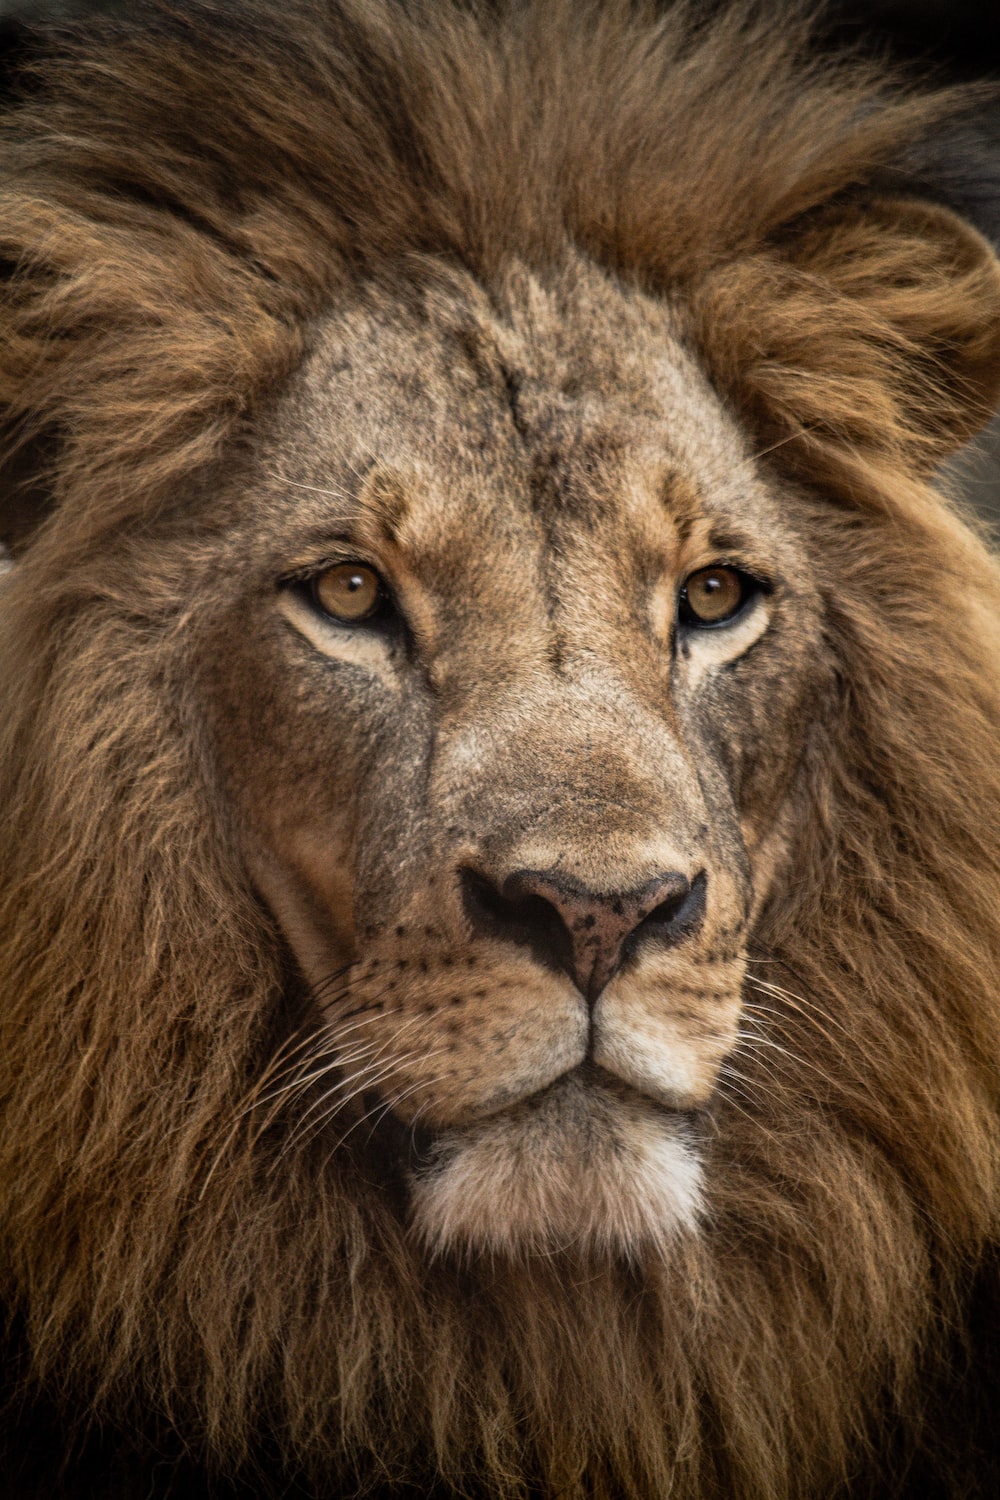 K male lion pictures download free images on